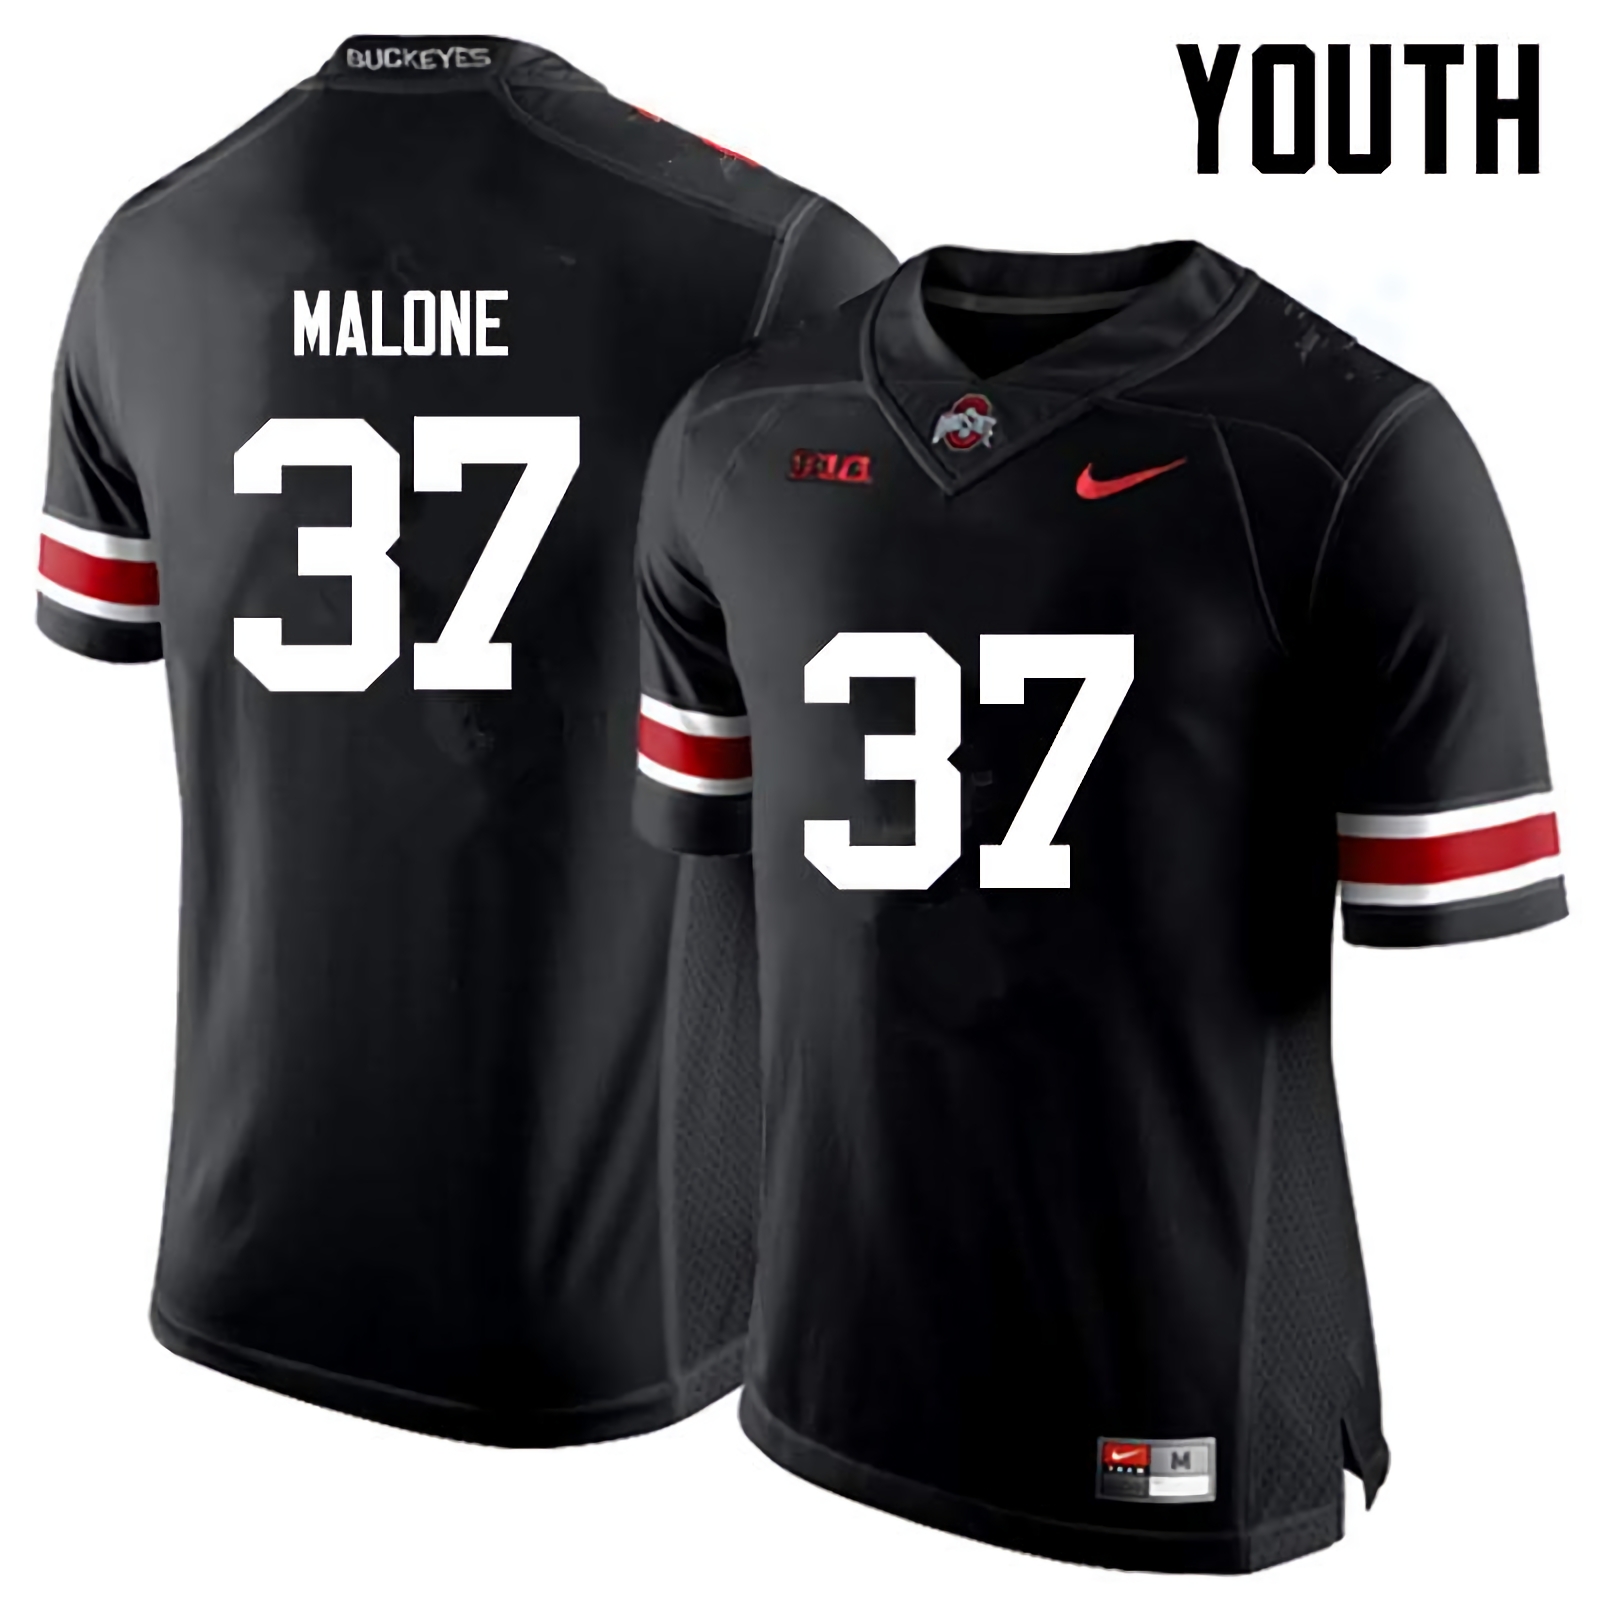 Derrick Malone Ohio State Buckeyes Youth NCAA #37 Nike Black College Stitched Football Jersey MKL0456DH